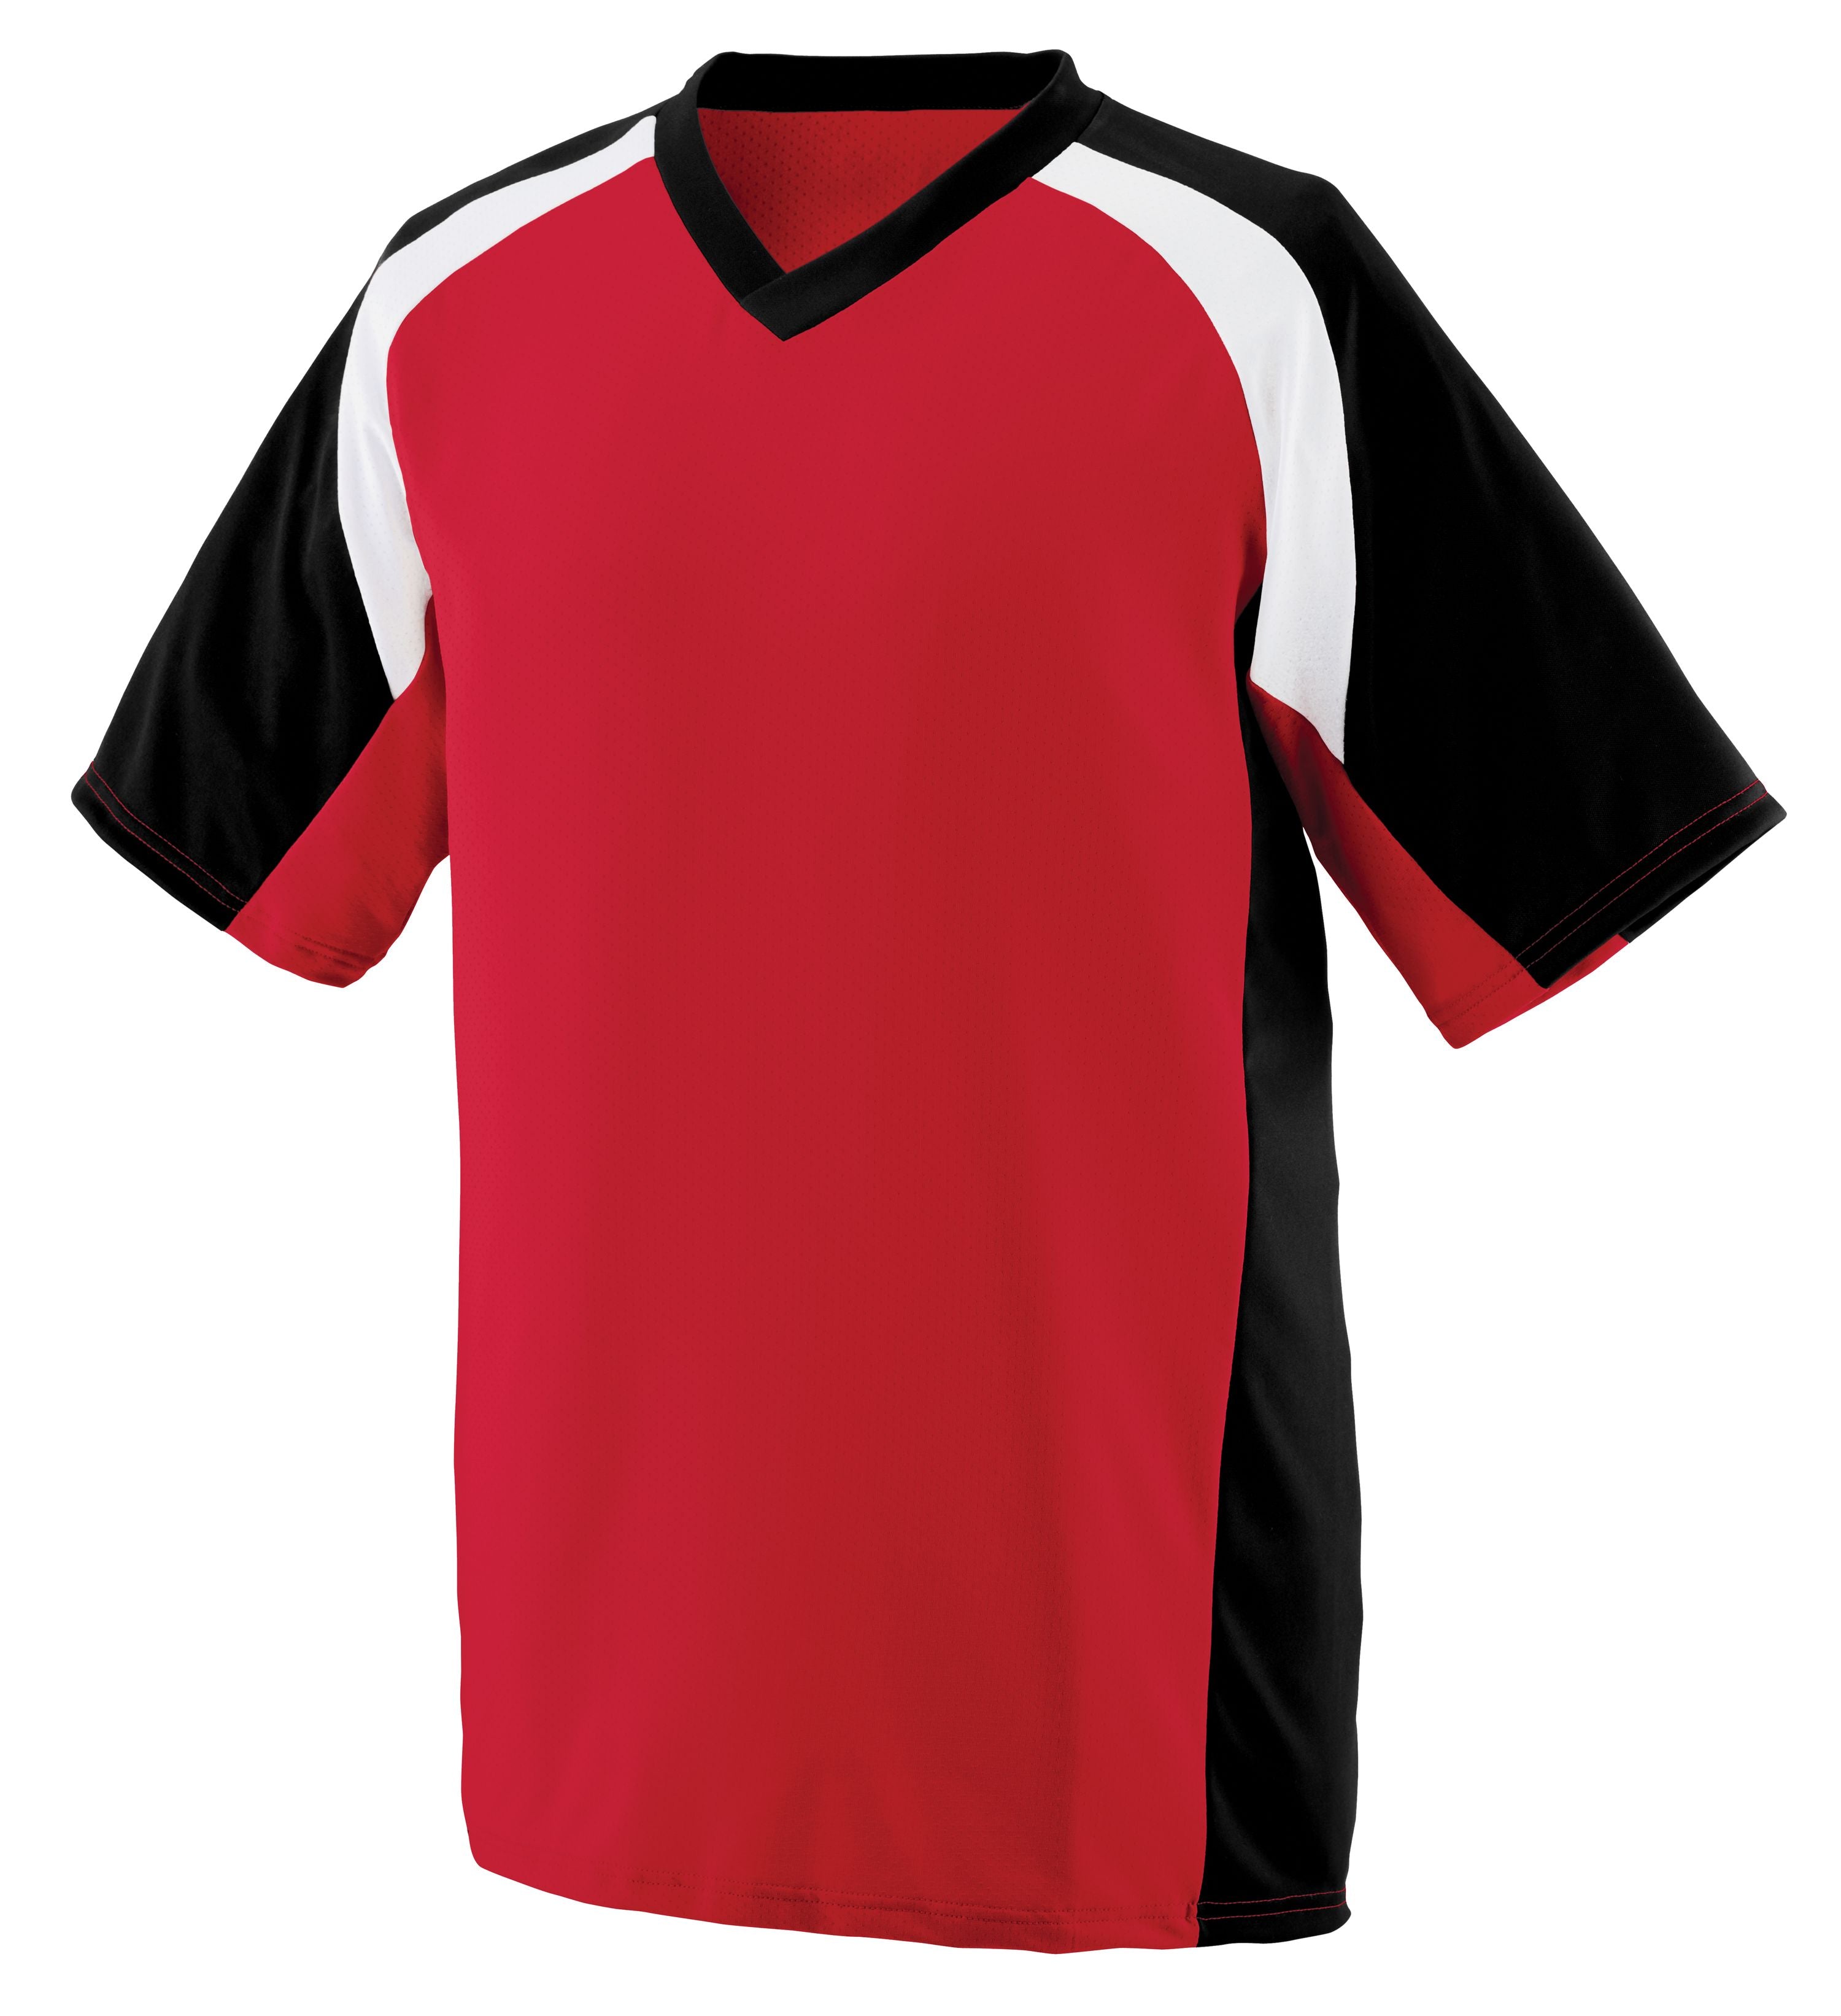 Augusta Sportswear Nitro Jersey in Red/Black/White  -Part of the Adult, Adult-Jersey, Augusta-Products, Football, Shirts, All-Sports, All-Sports-1 product lines at KanaleyCreations.com